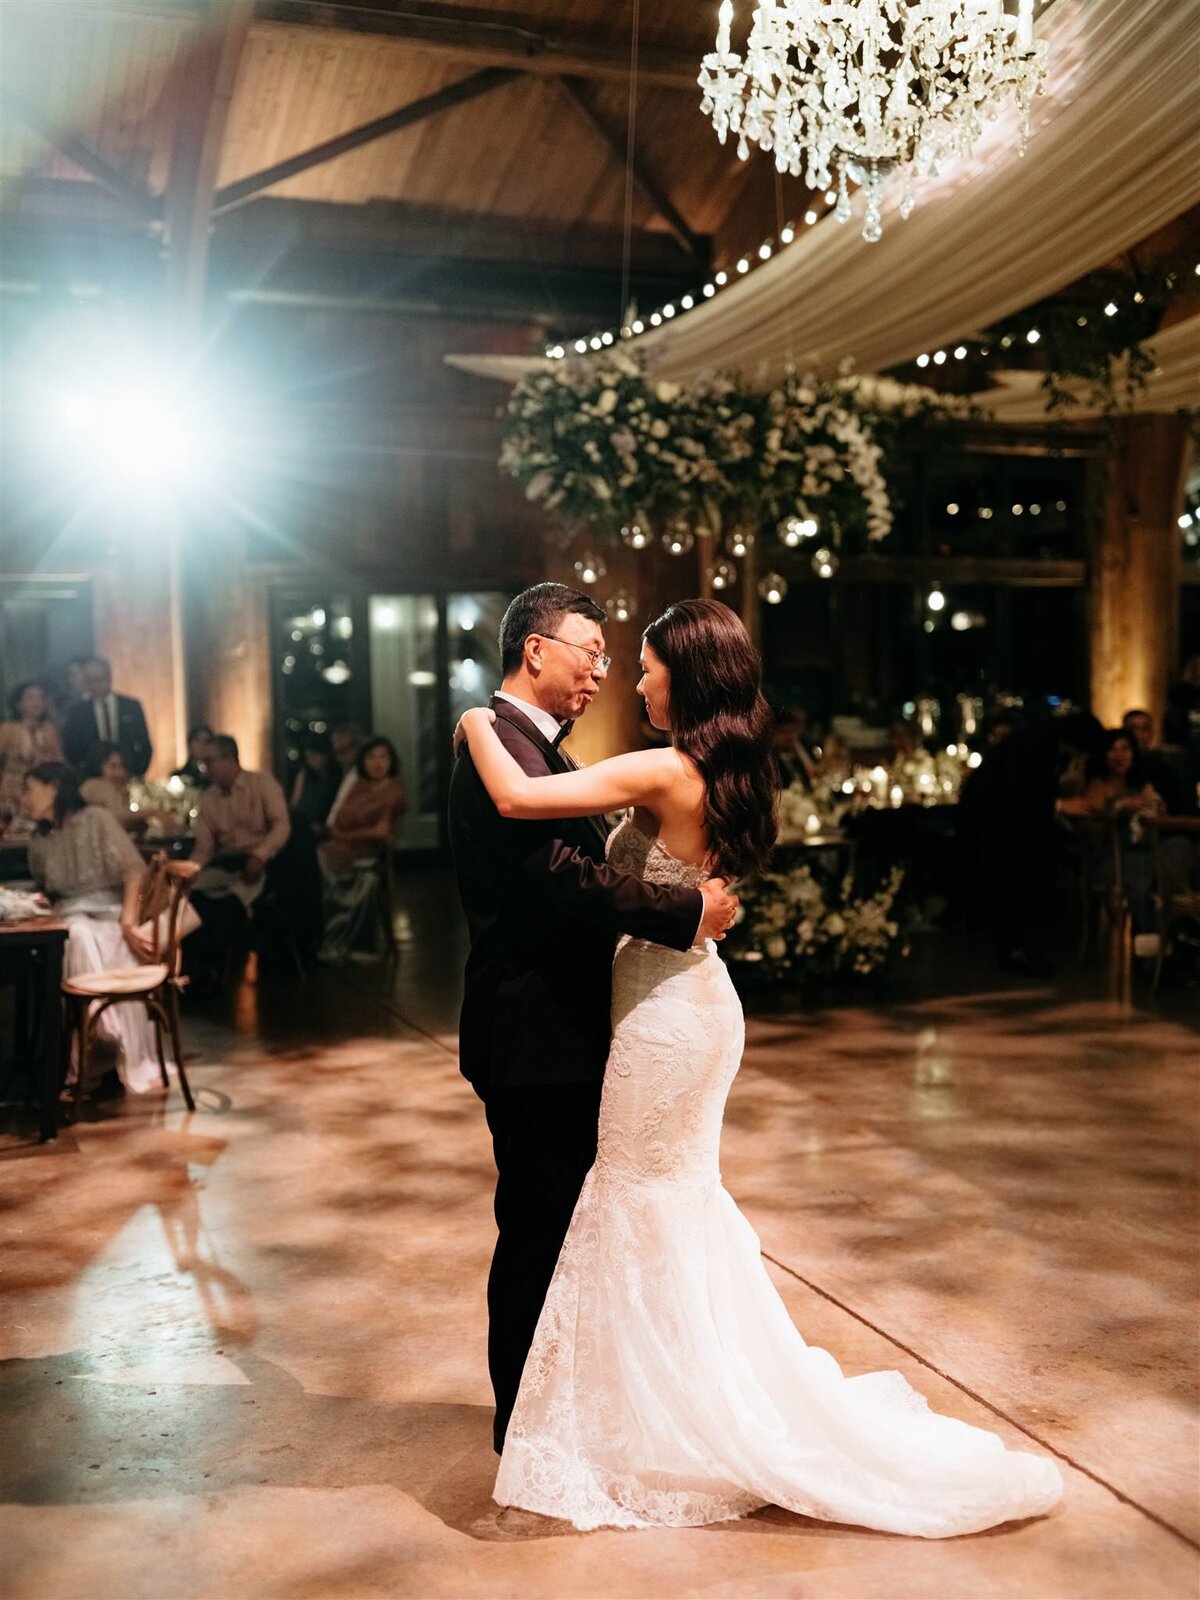 Father-daughter dance at Cedar Lakes Estate wedding venue in Hudson Valley